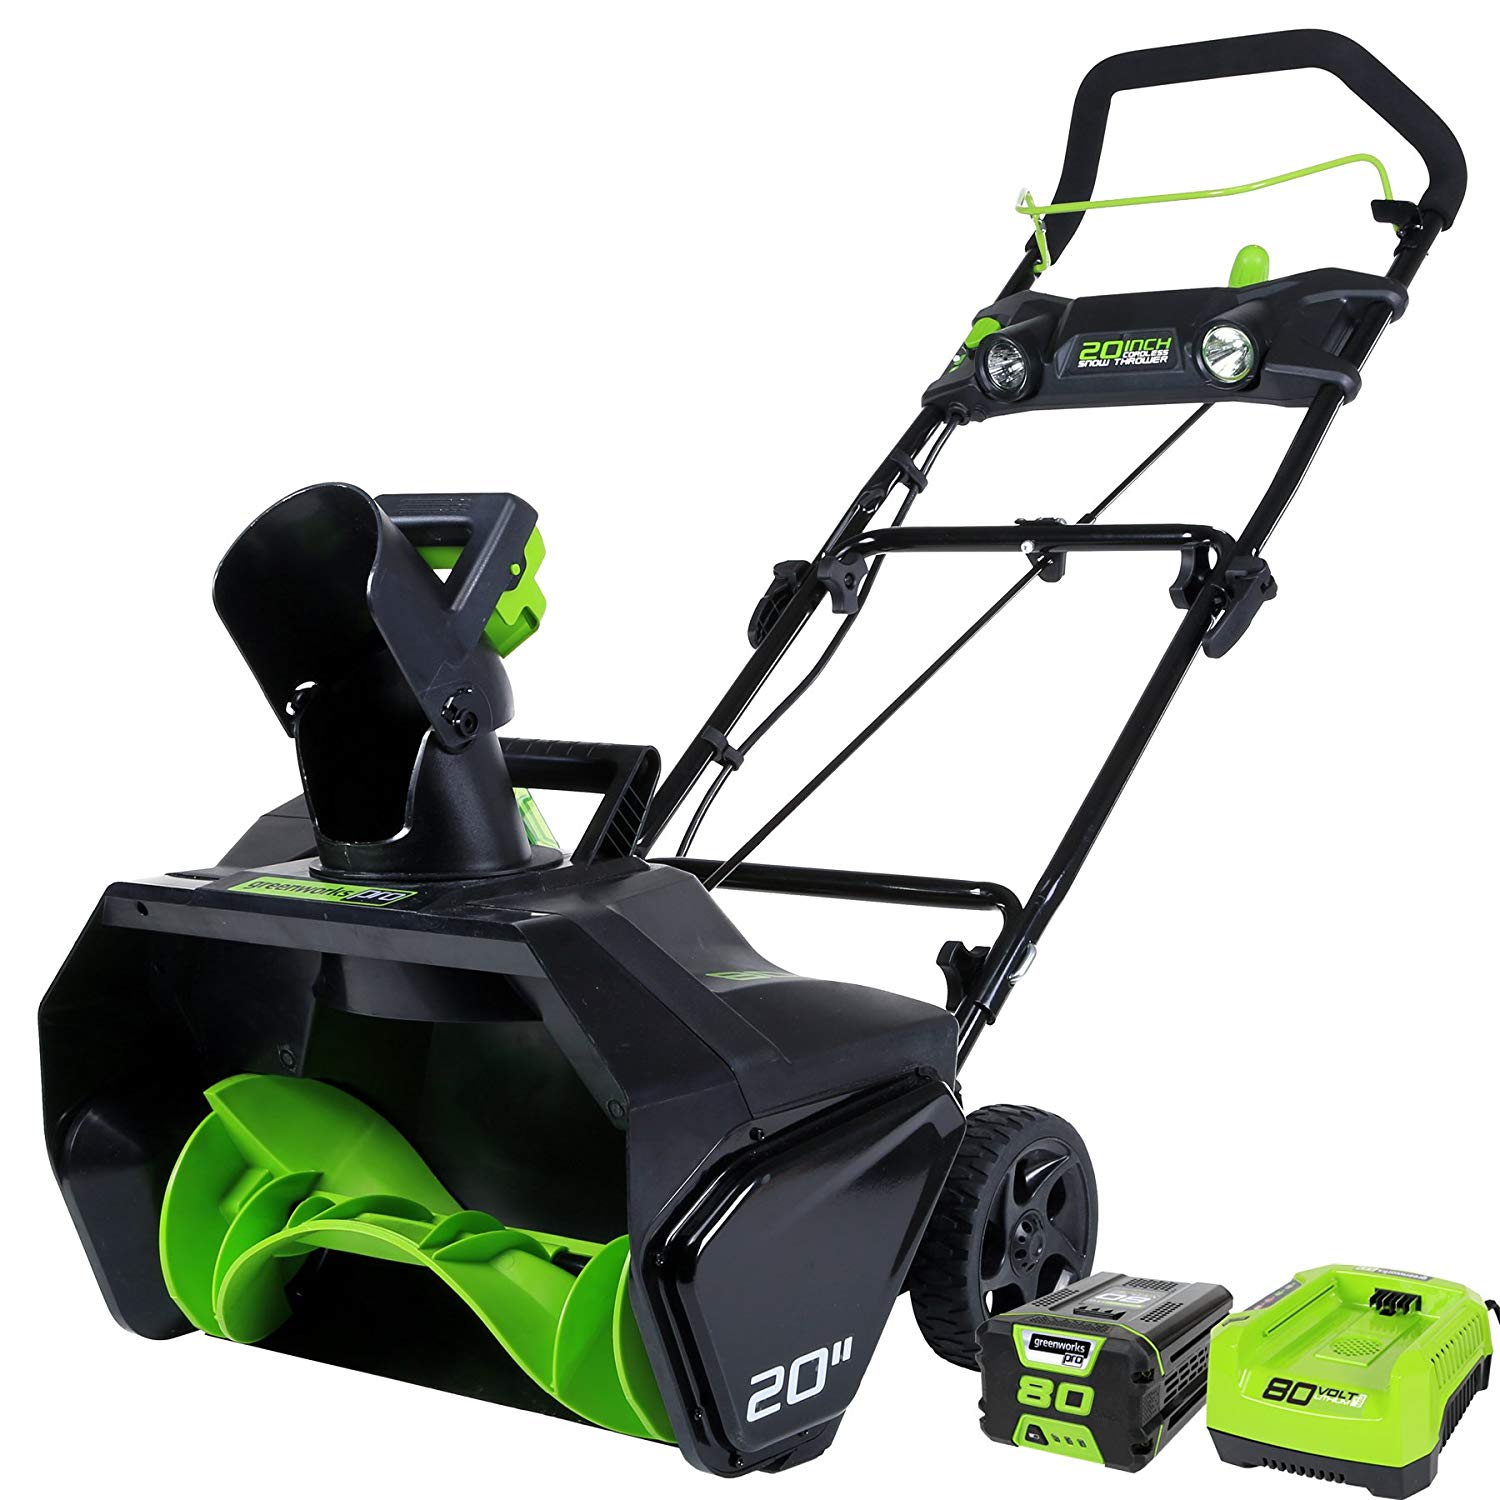 GreenWorks Pro 80V 20-Inch Cordless Snow Thrower, 2Ah Battery & Charger Included